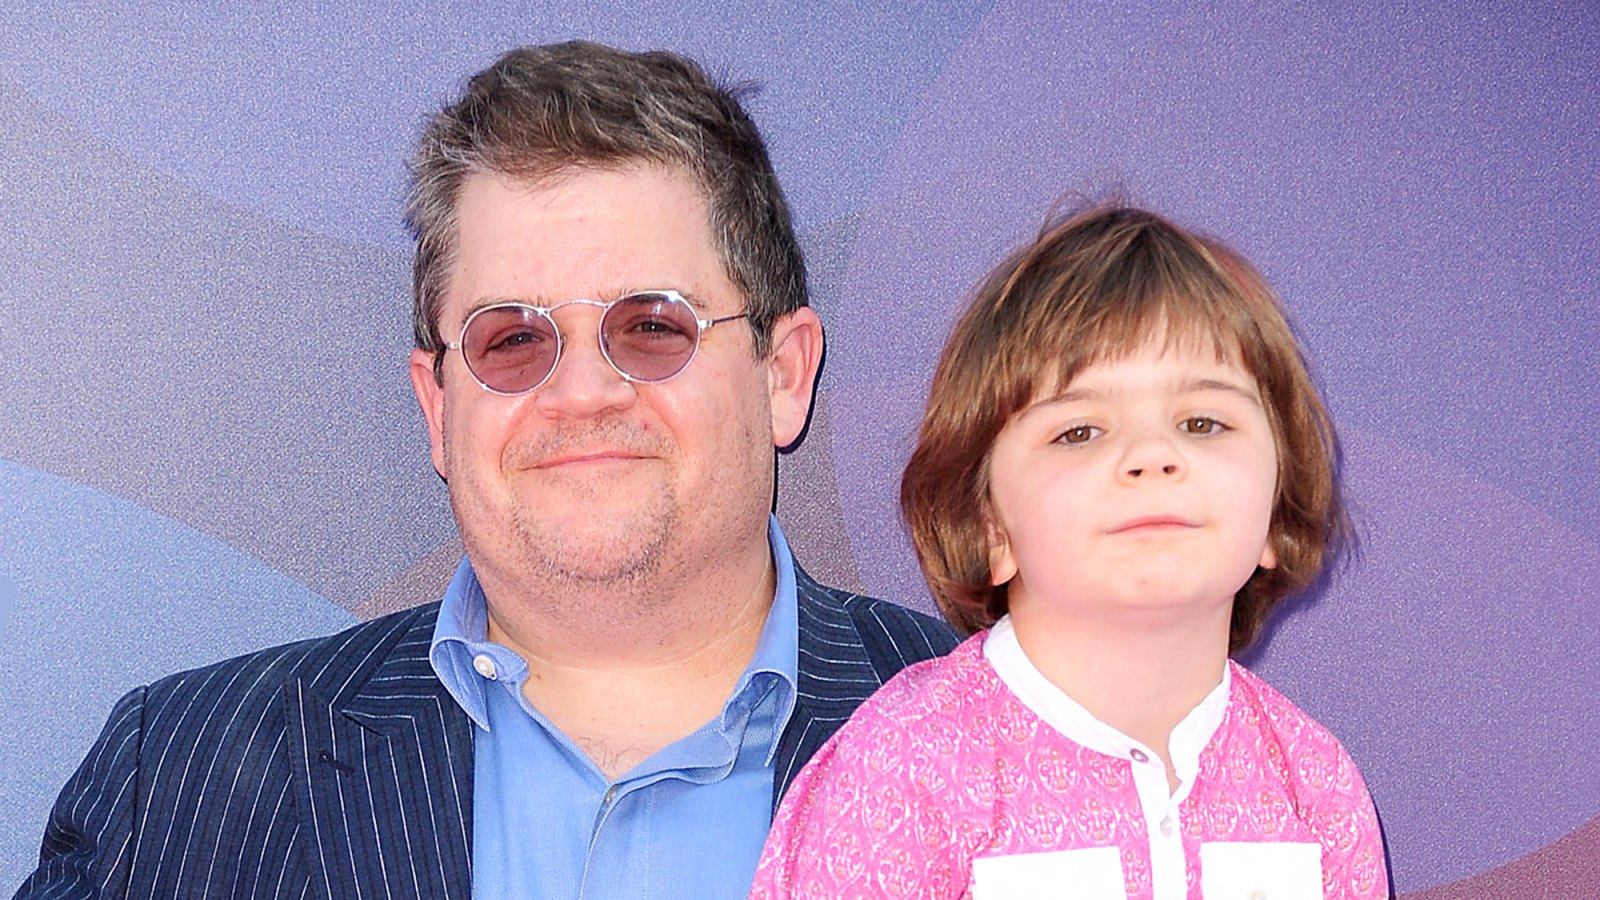 Patton Oswalt and daughter Alice attend the 2015 premiere of "Inside Out" at the El Capitan Theatre in Hollywood, California.